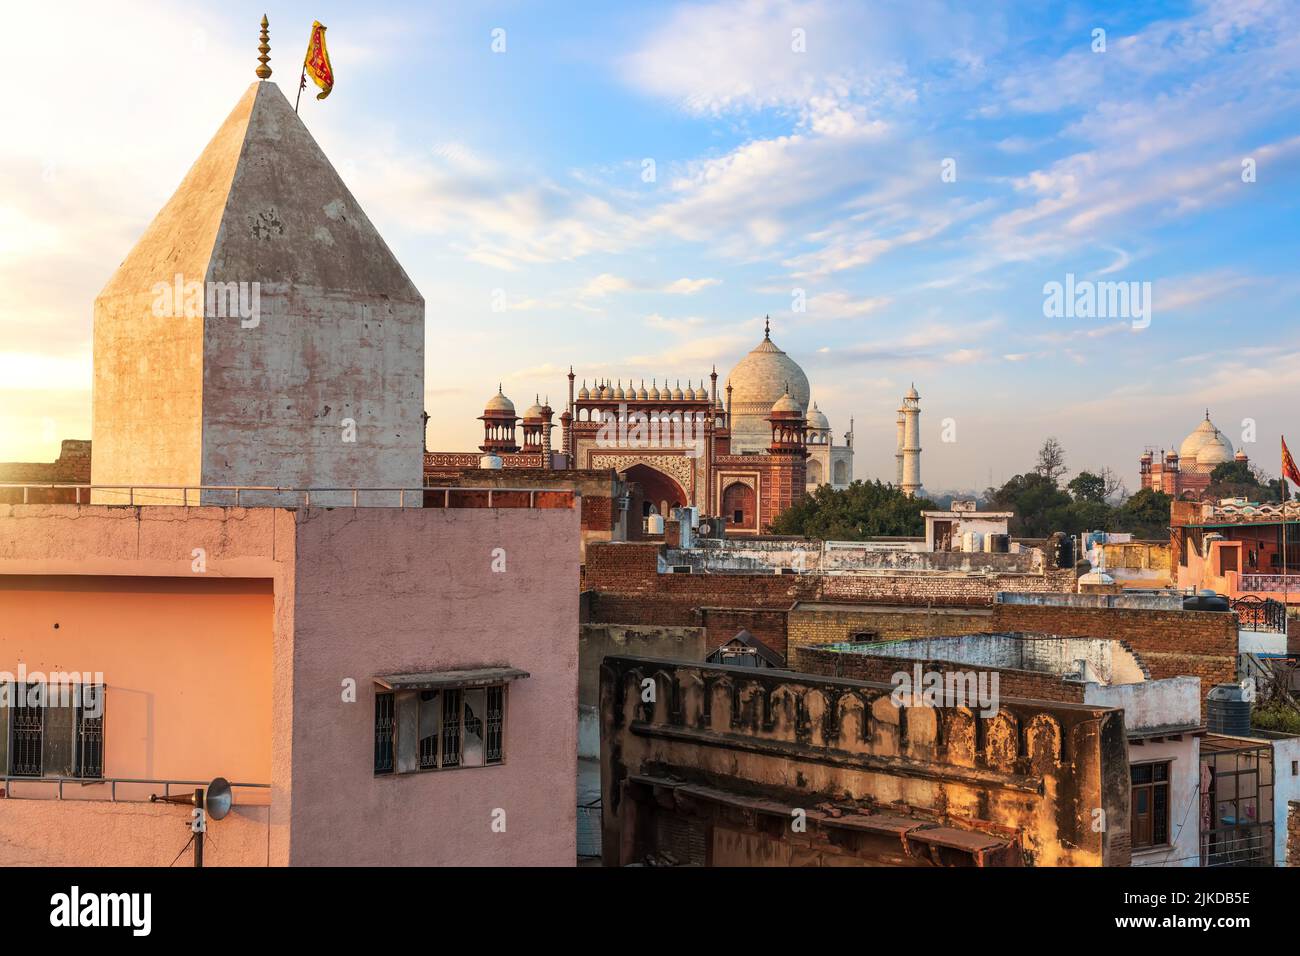 Agra deprived area and view on the Taj Mahal gate, India. Stock Photo